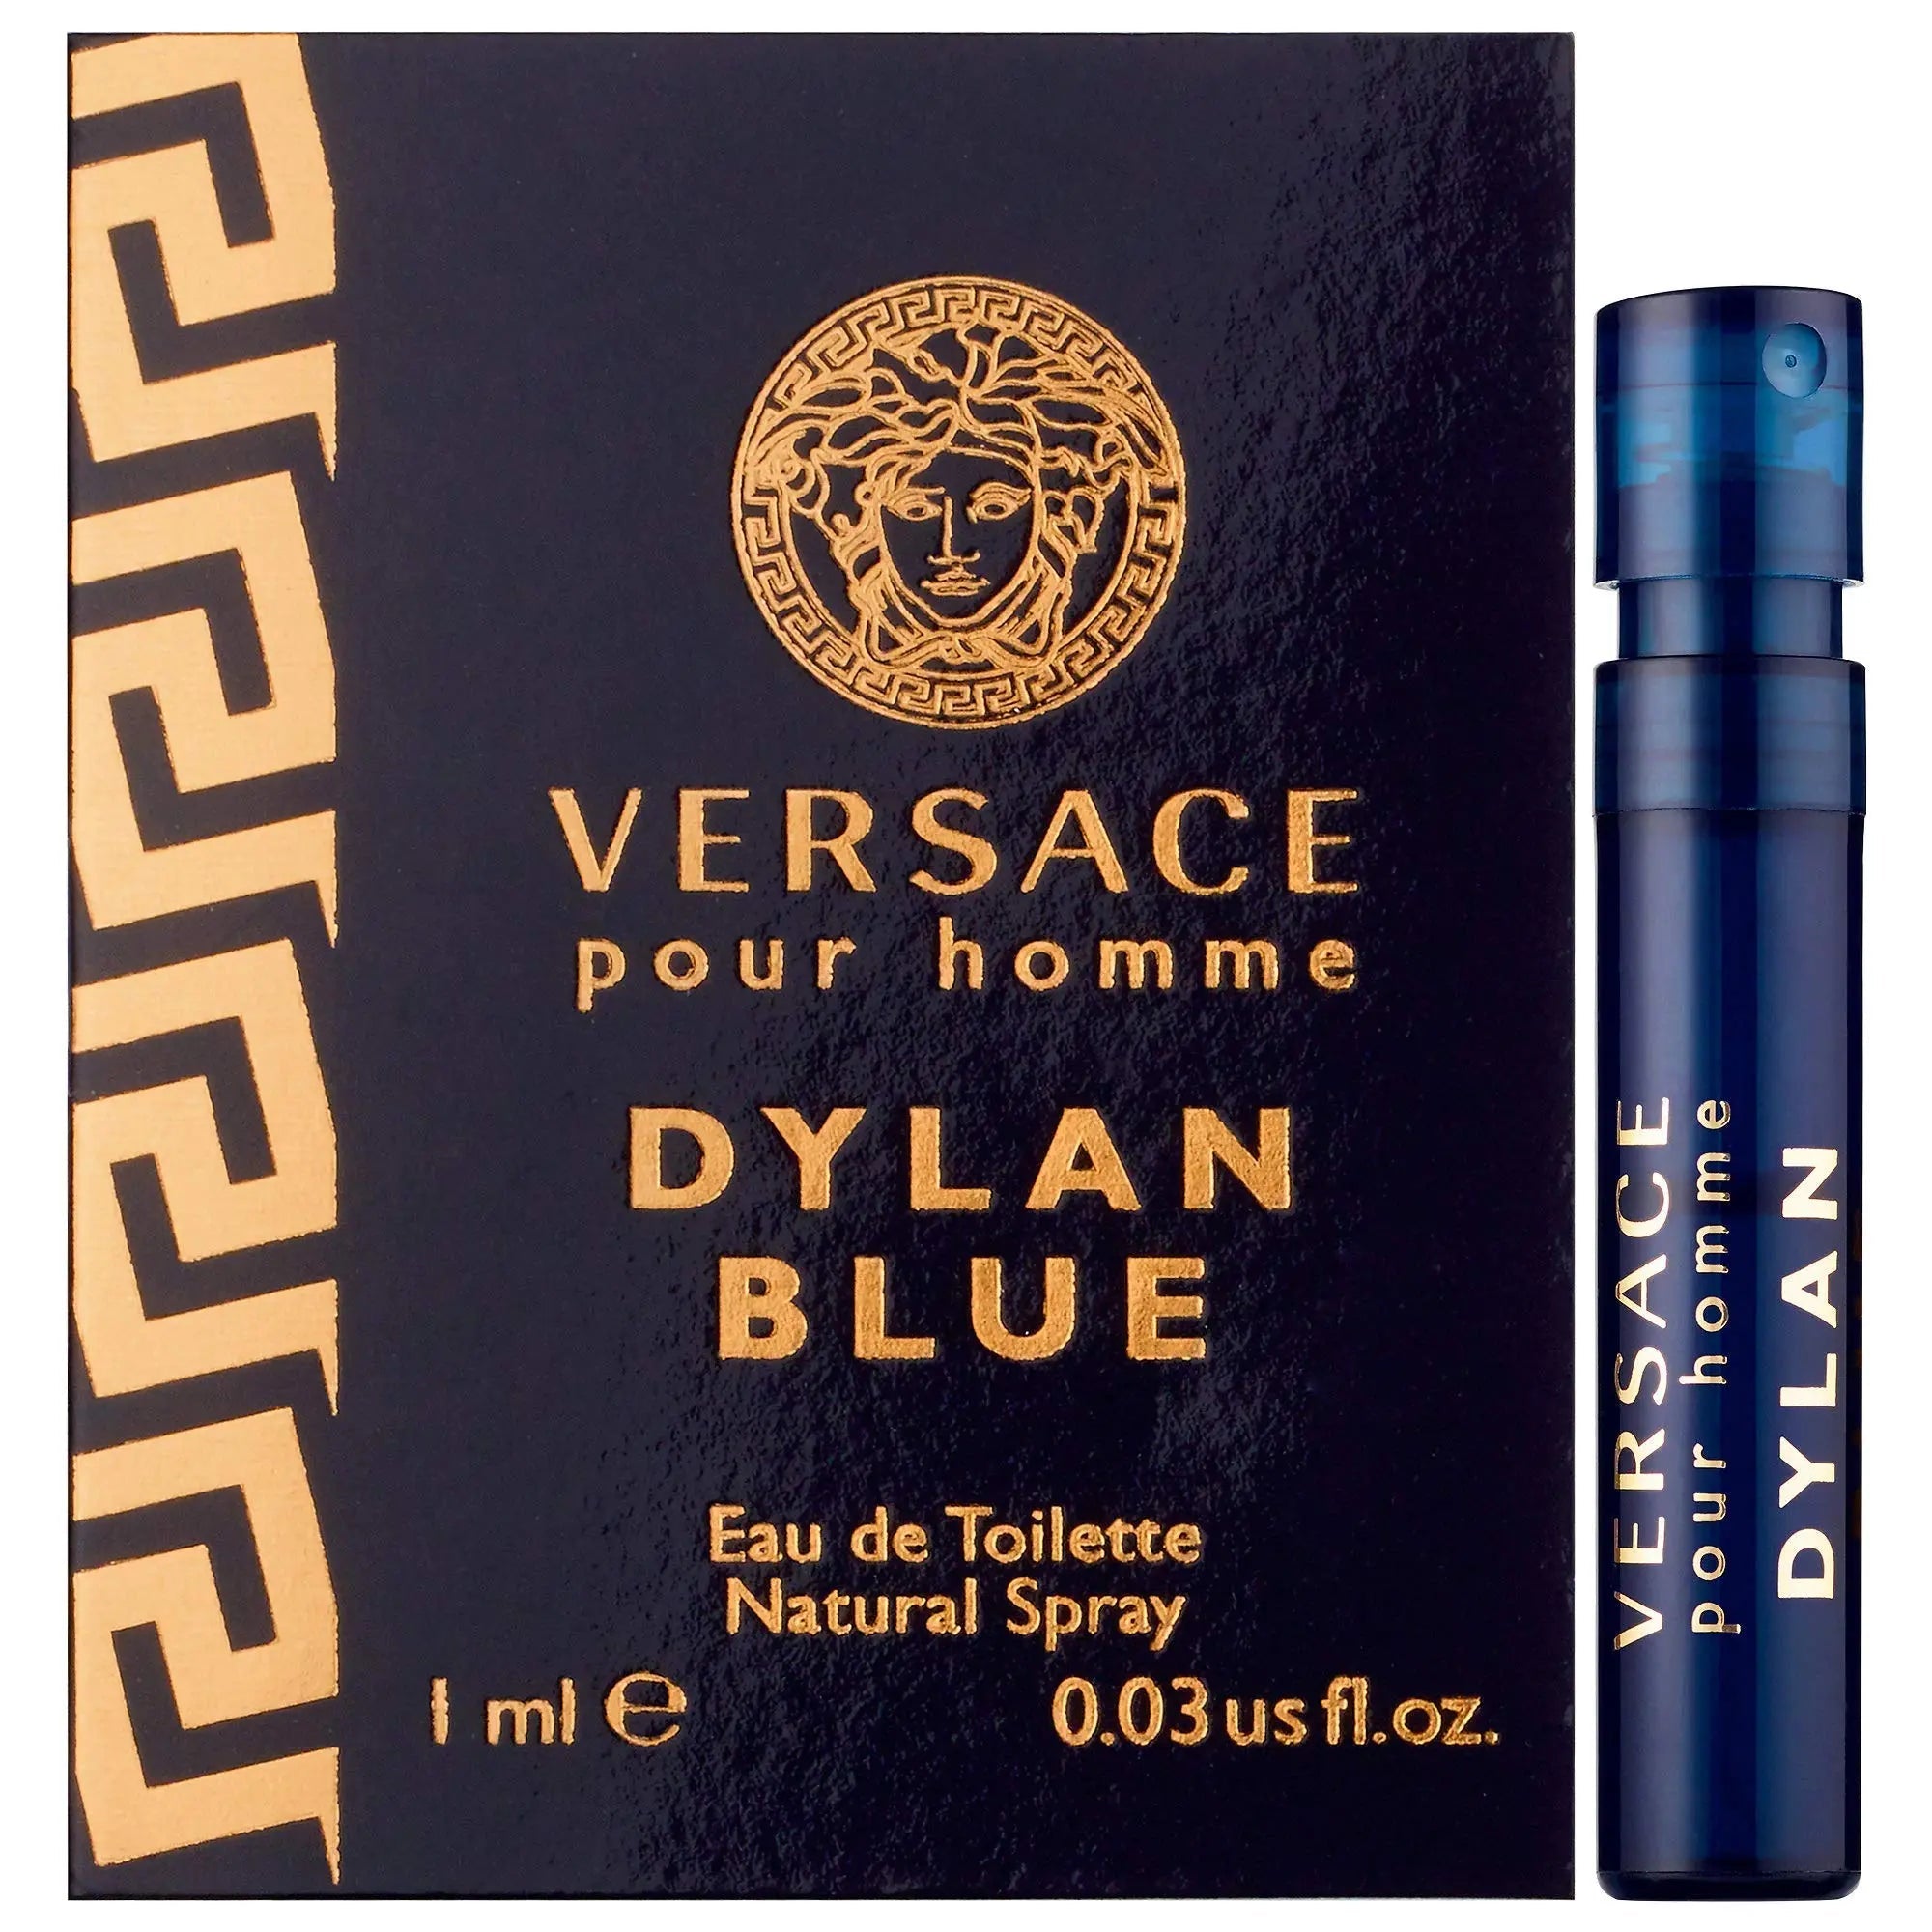 Versace Pour Homme Dylan Blue EDT Sample 1ml Male